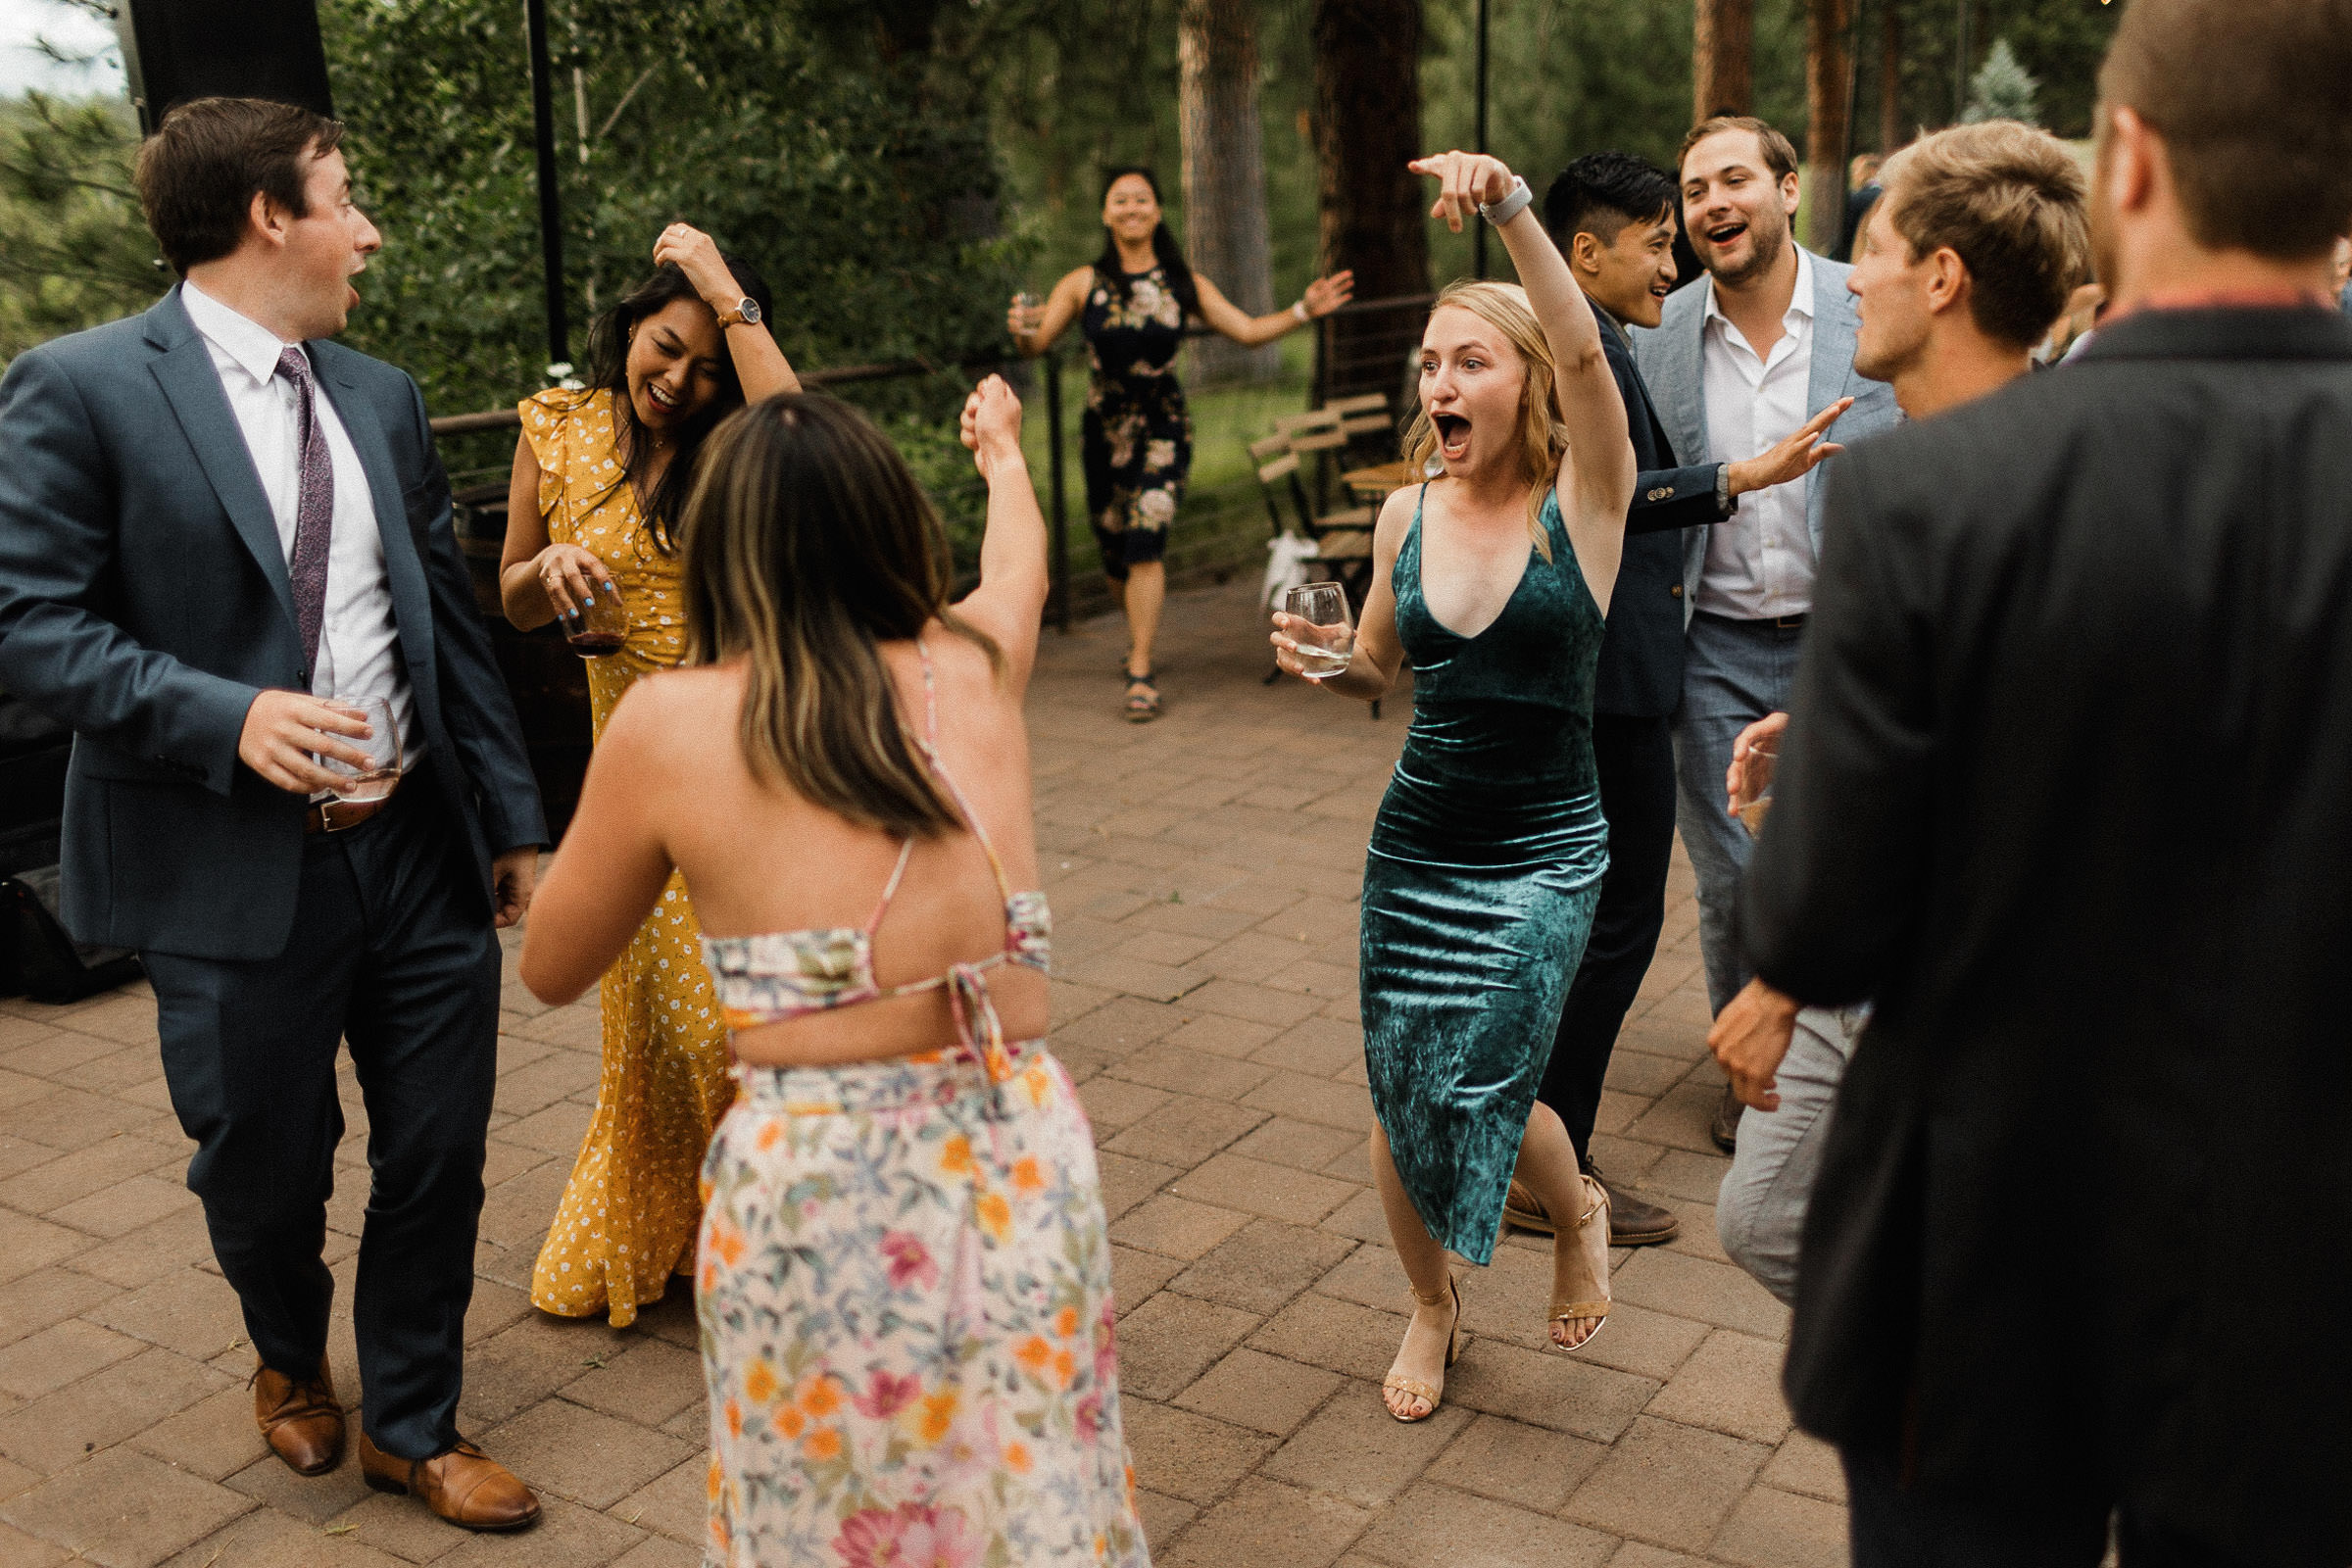 Guests dance during outdoor reception 